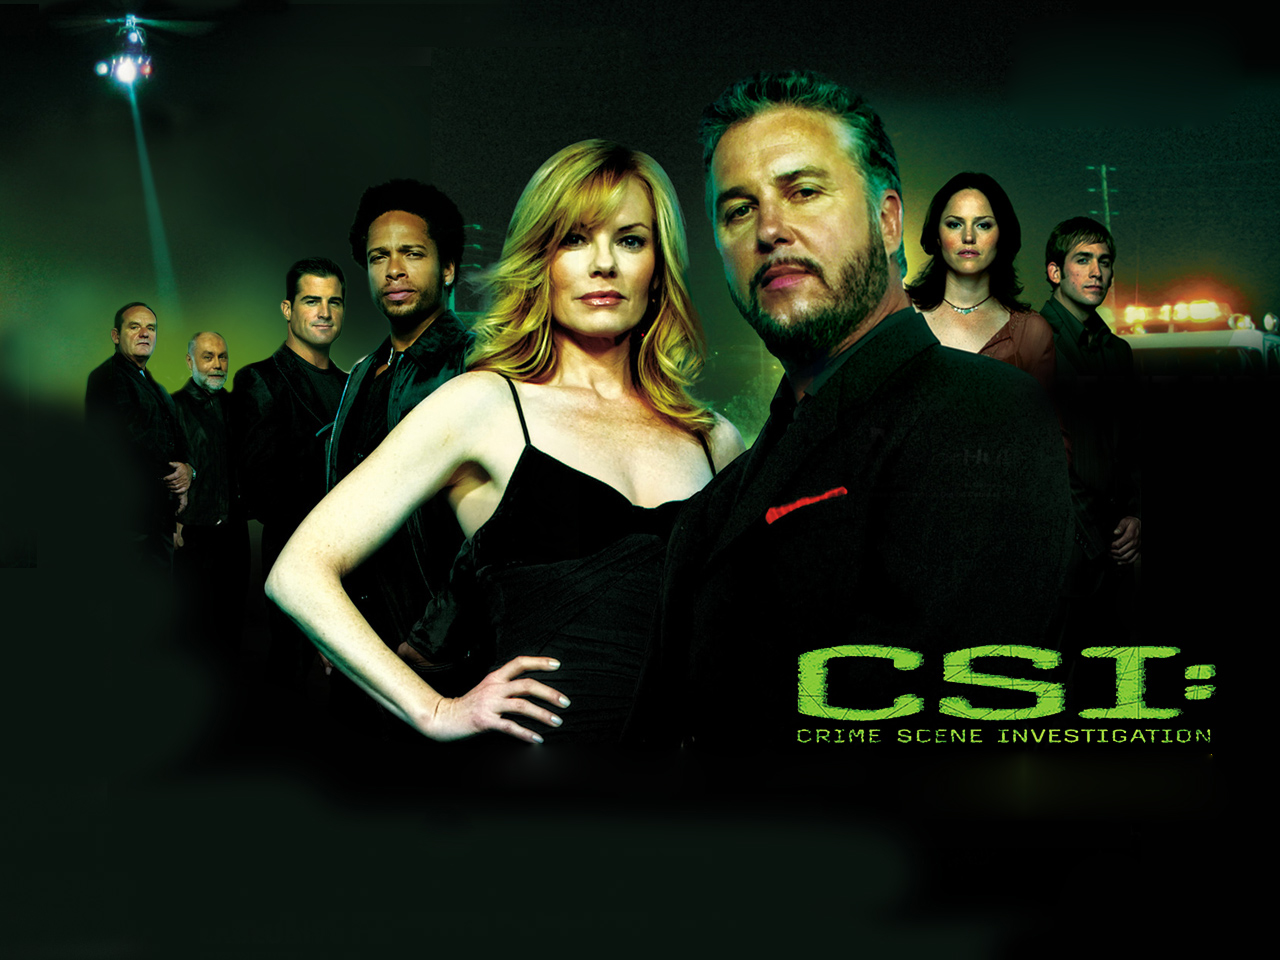 Gil Grissom Image Csi HD Wallpaper And Background Photos